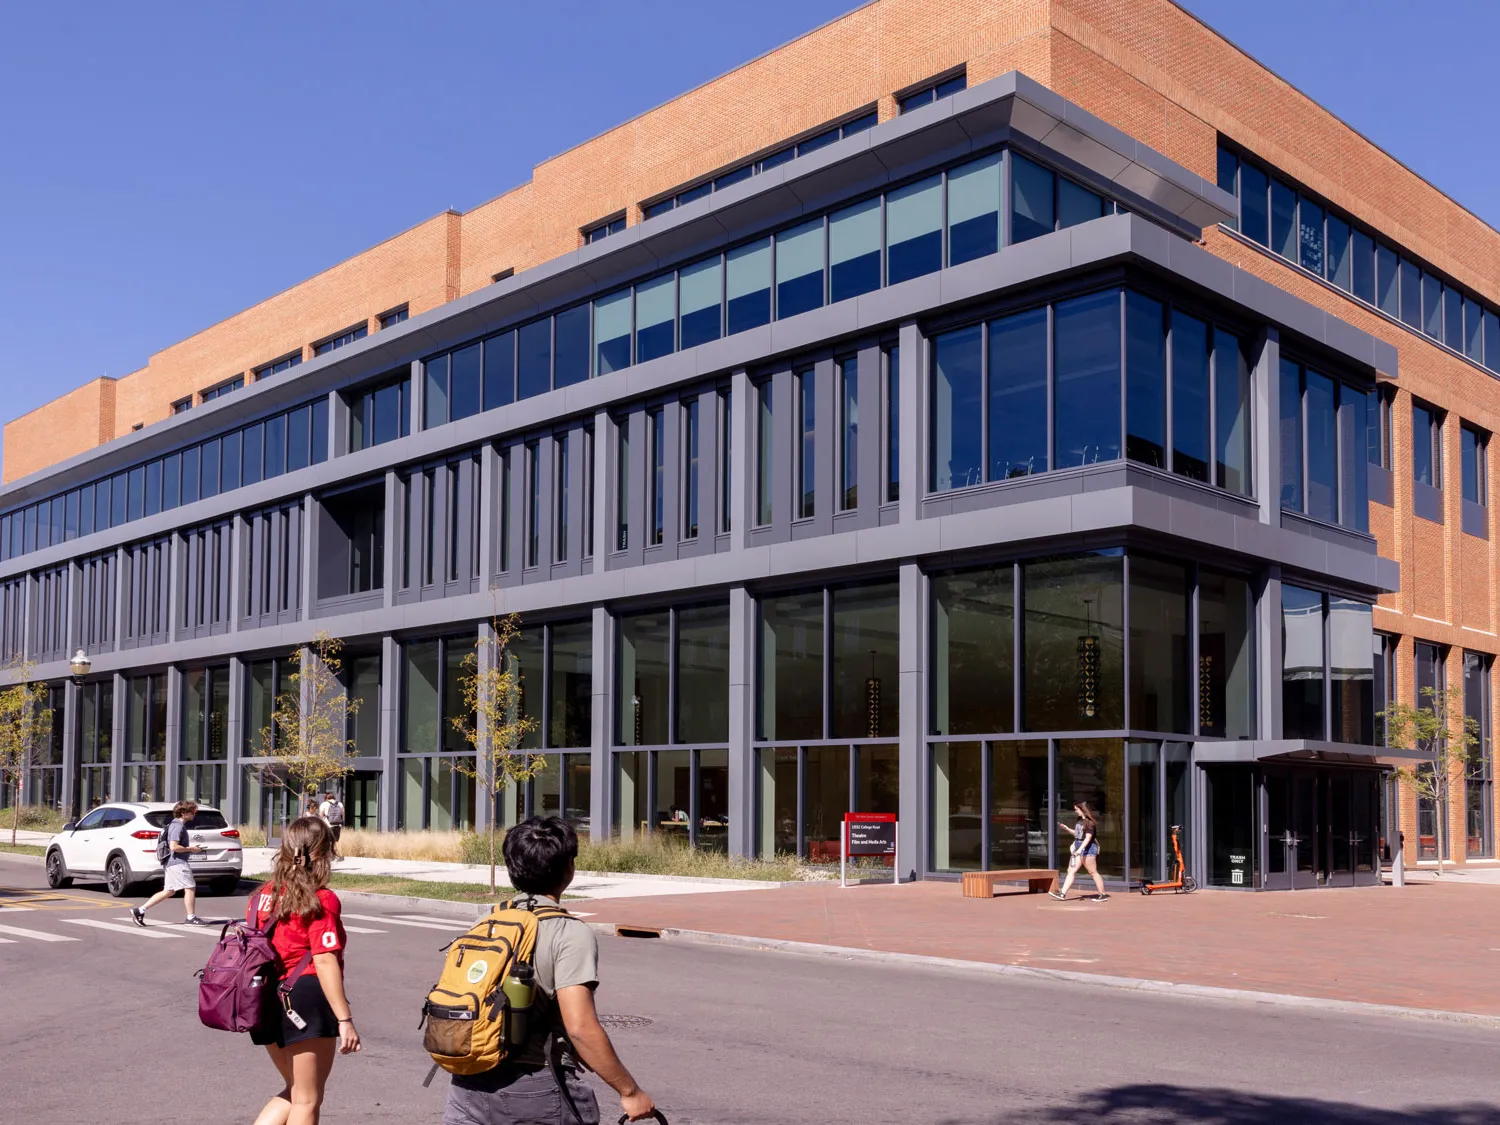 A building that is much longer than it is tall has a facade with two levels of windows and warm colored brick. It looks modern and ready for great things to come from within. Two students cross the street toward the building.